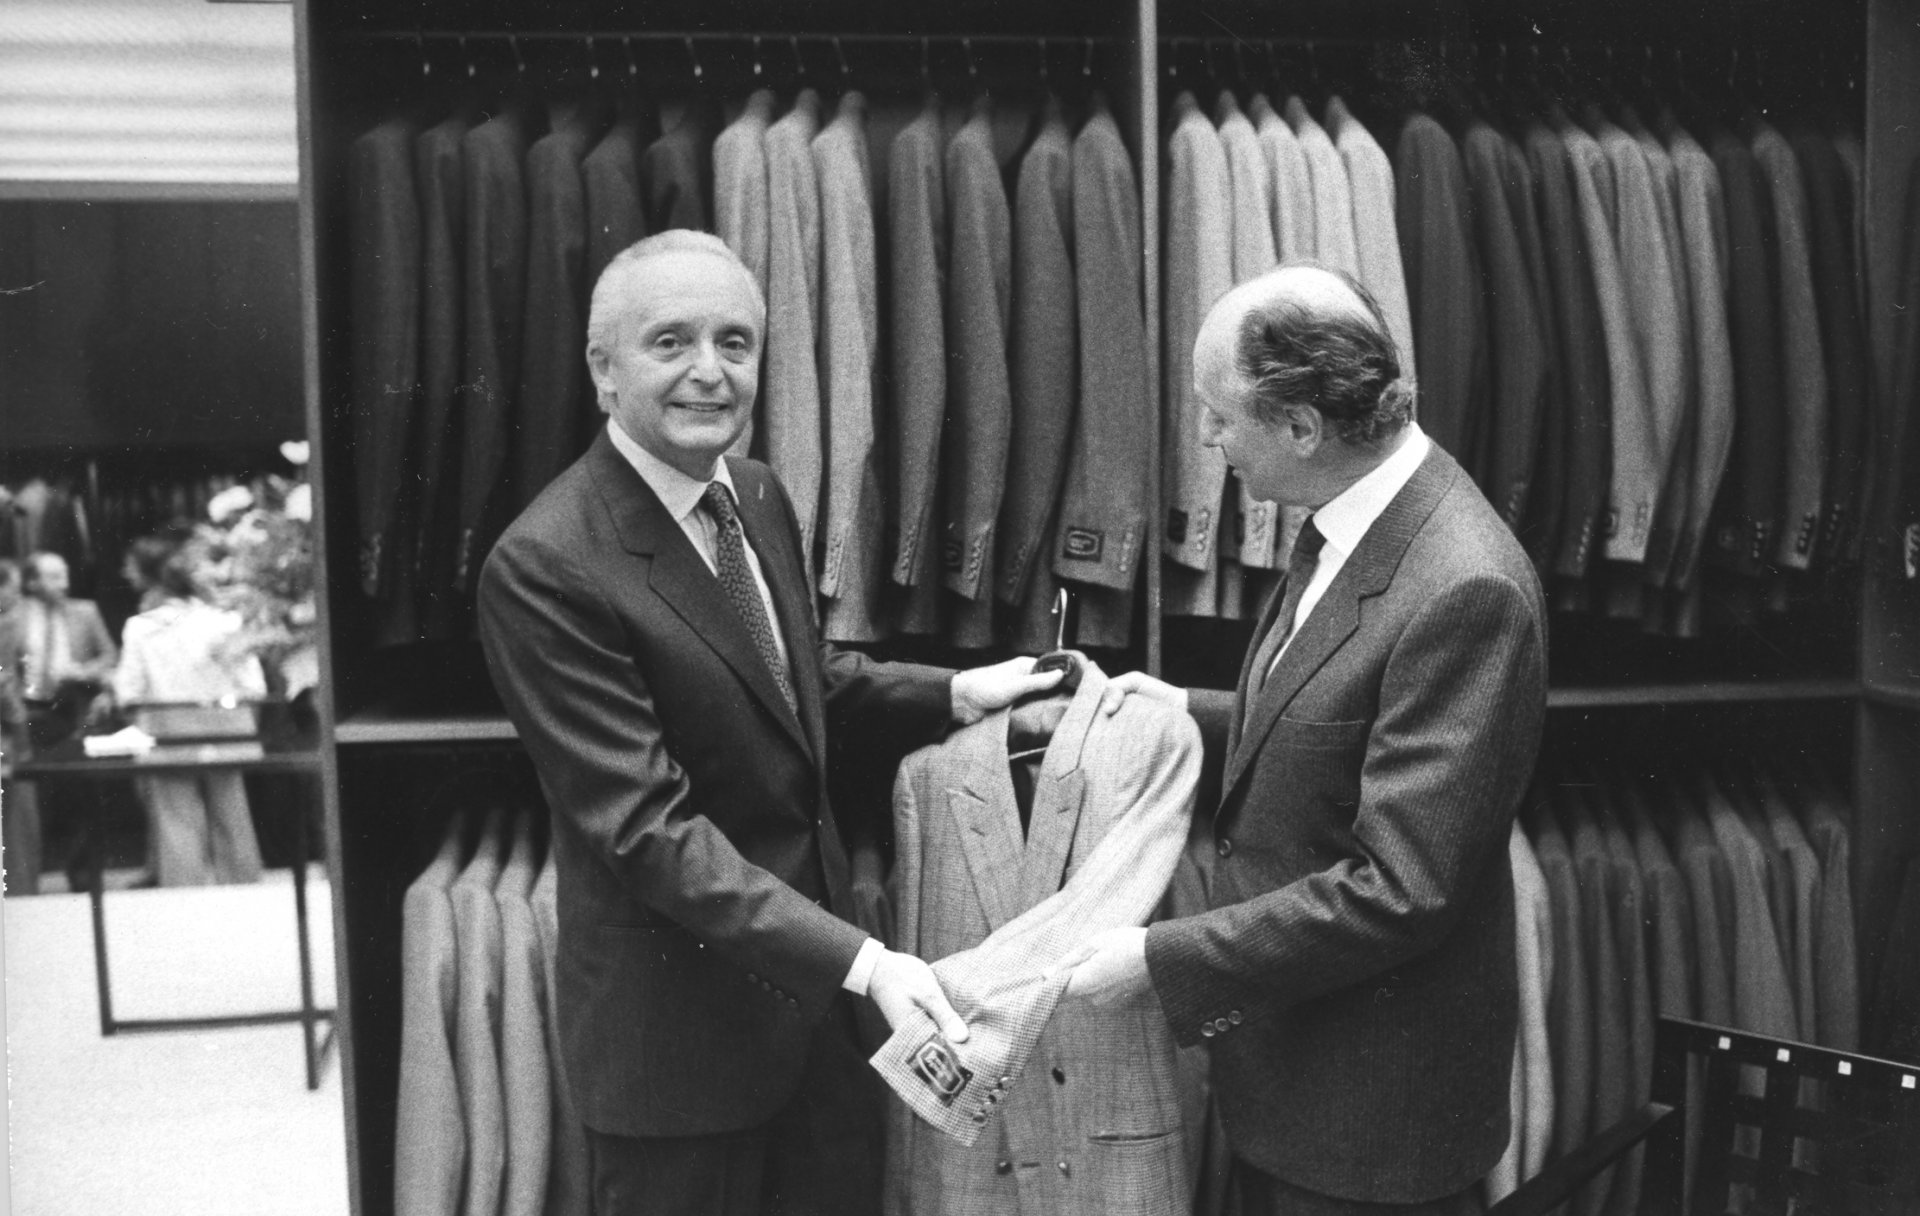 Angelo and Aldo Zegna - Opening first Zegna boutique in Paris 1980